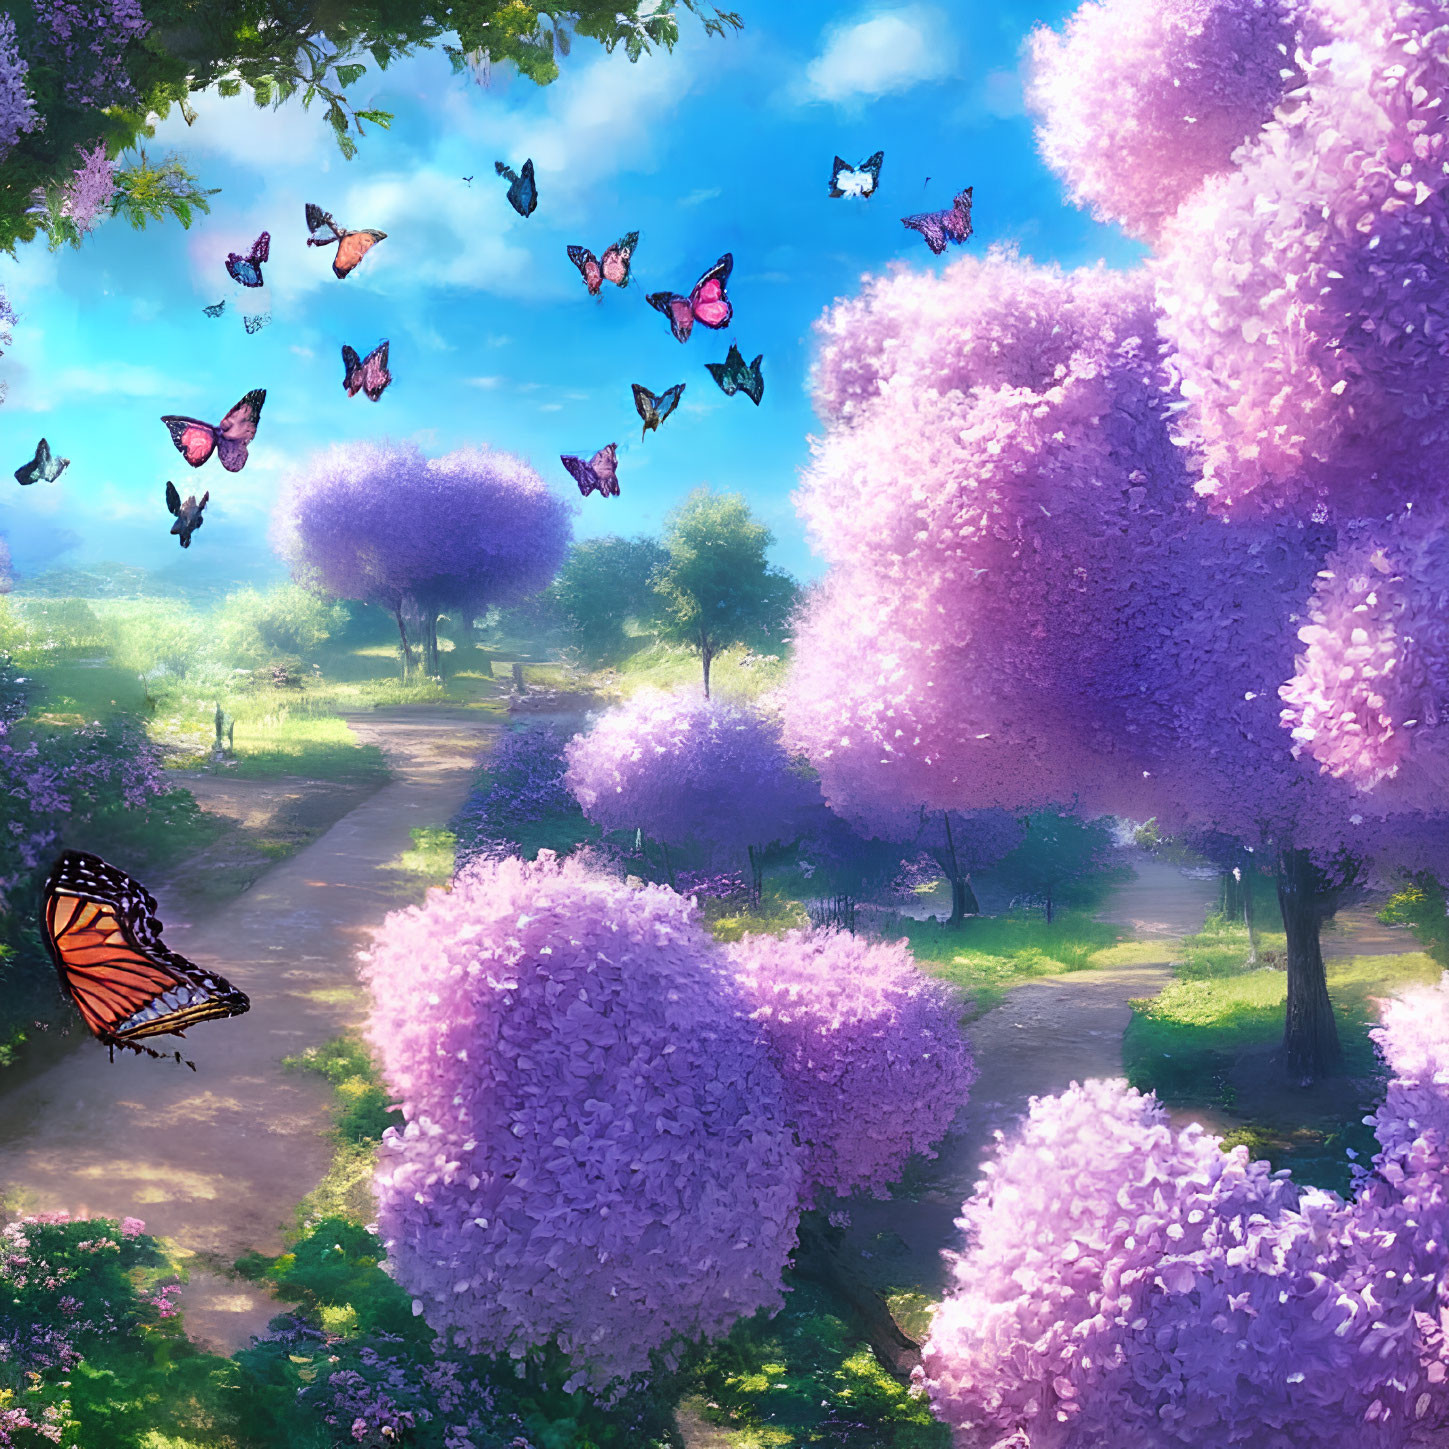 Lush Garden Path with Purple Blooming Trees and Butterflies